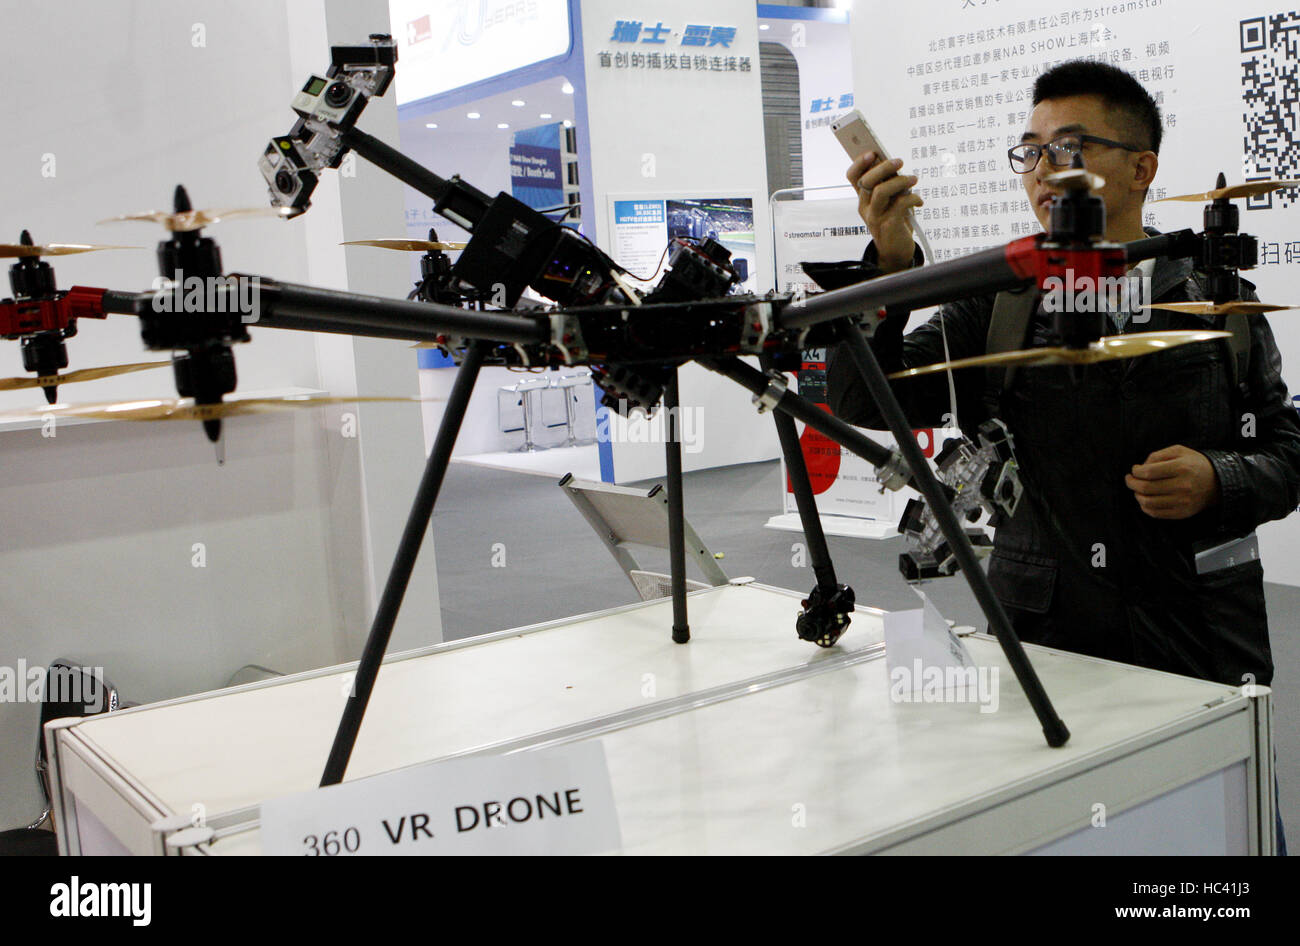 Shanghai. 7th Dec, 2016. A visitor takes photos of a 360 VR drone at the National Association of Broadcasters (NAB) Show Shanghai held in east China's Shanghai, Dec. 7, 2016. Building on the strength and success of the NAB Show brand and its global influence, Shanghai's show is the premier event for the broadcast and transmedia industry in the Asia and Pacific region. Credit:  Fang Zhe/Xinhua/Alamy Live News Stock Photo